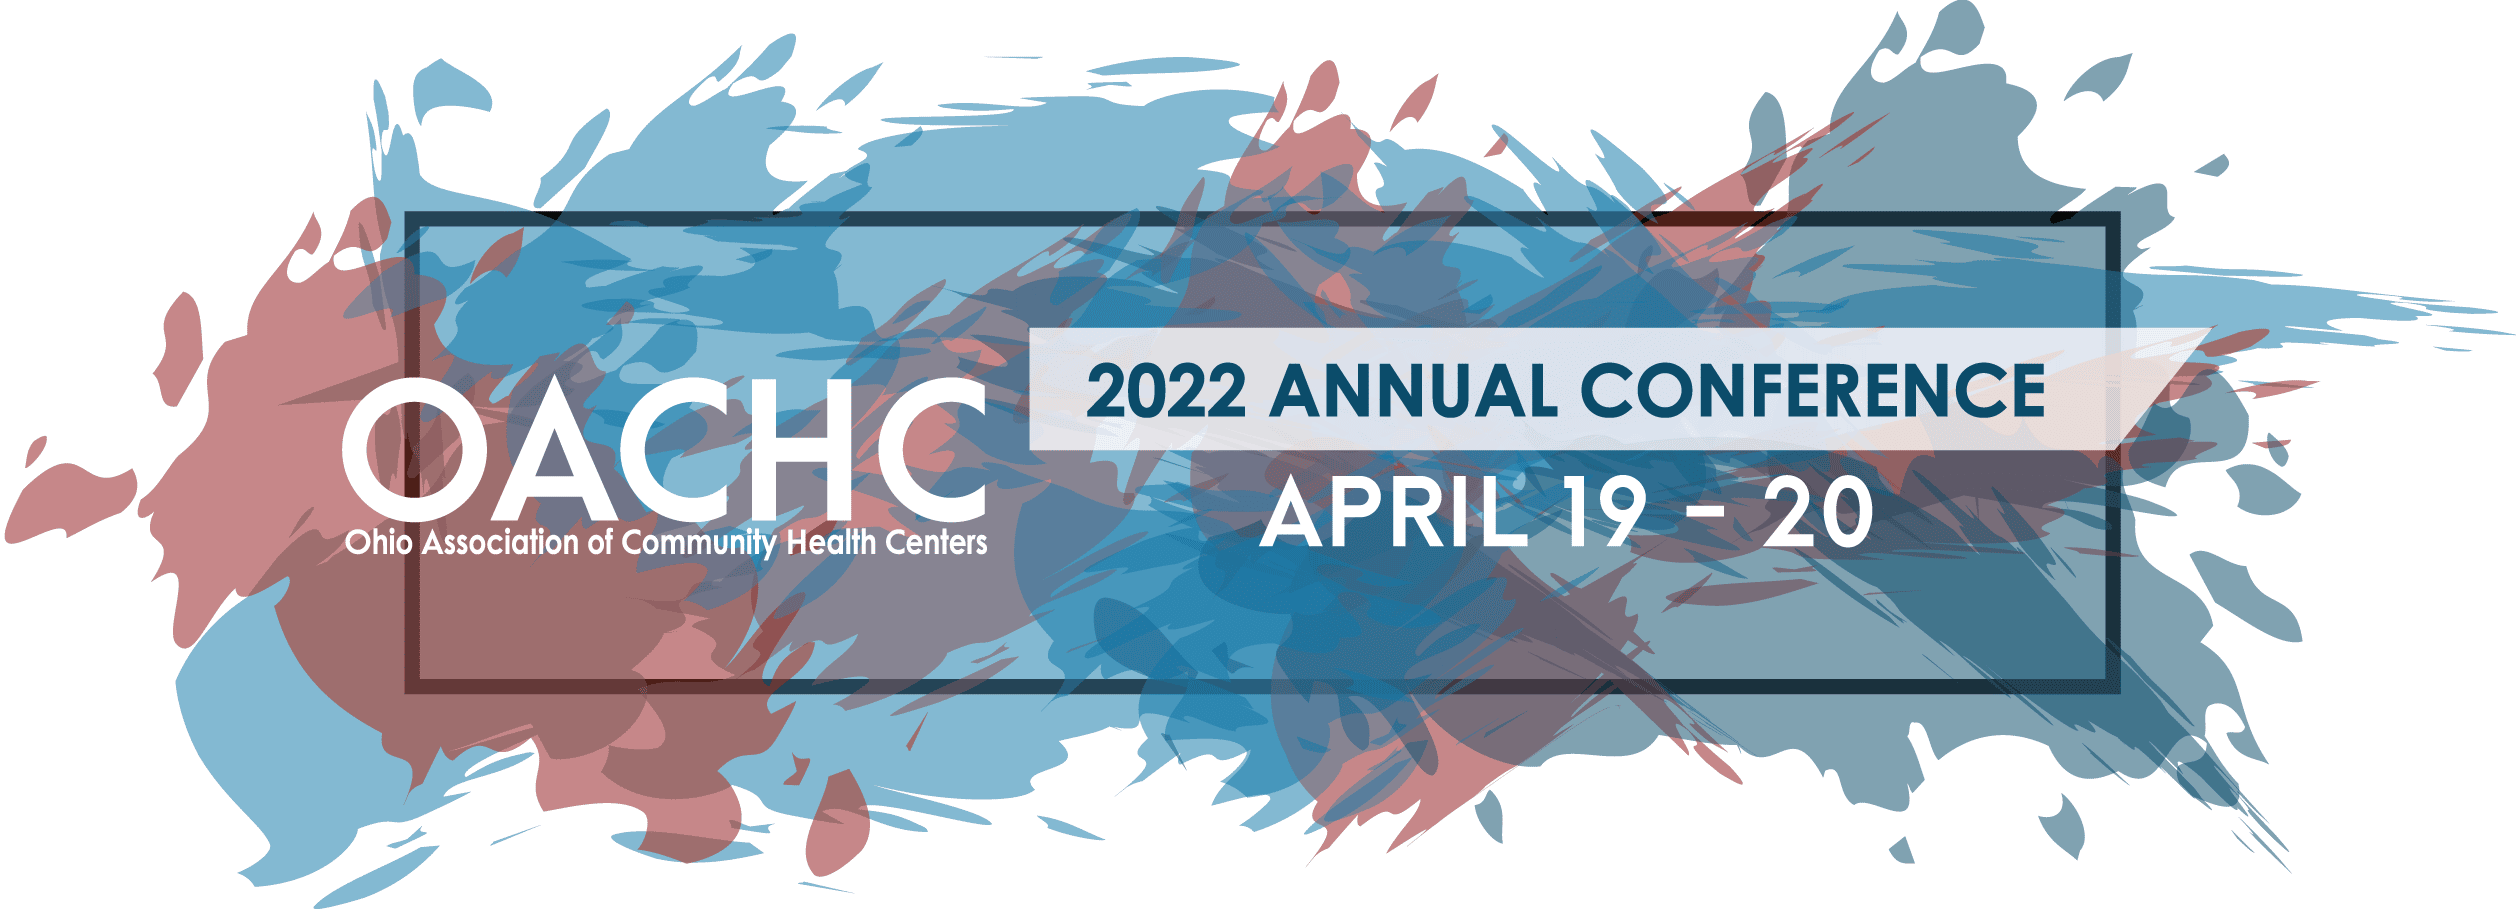 OACHC 2022 Annual Conference